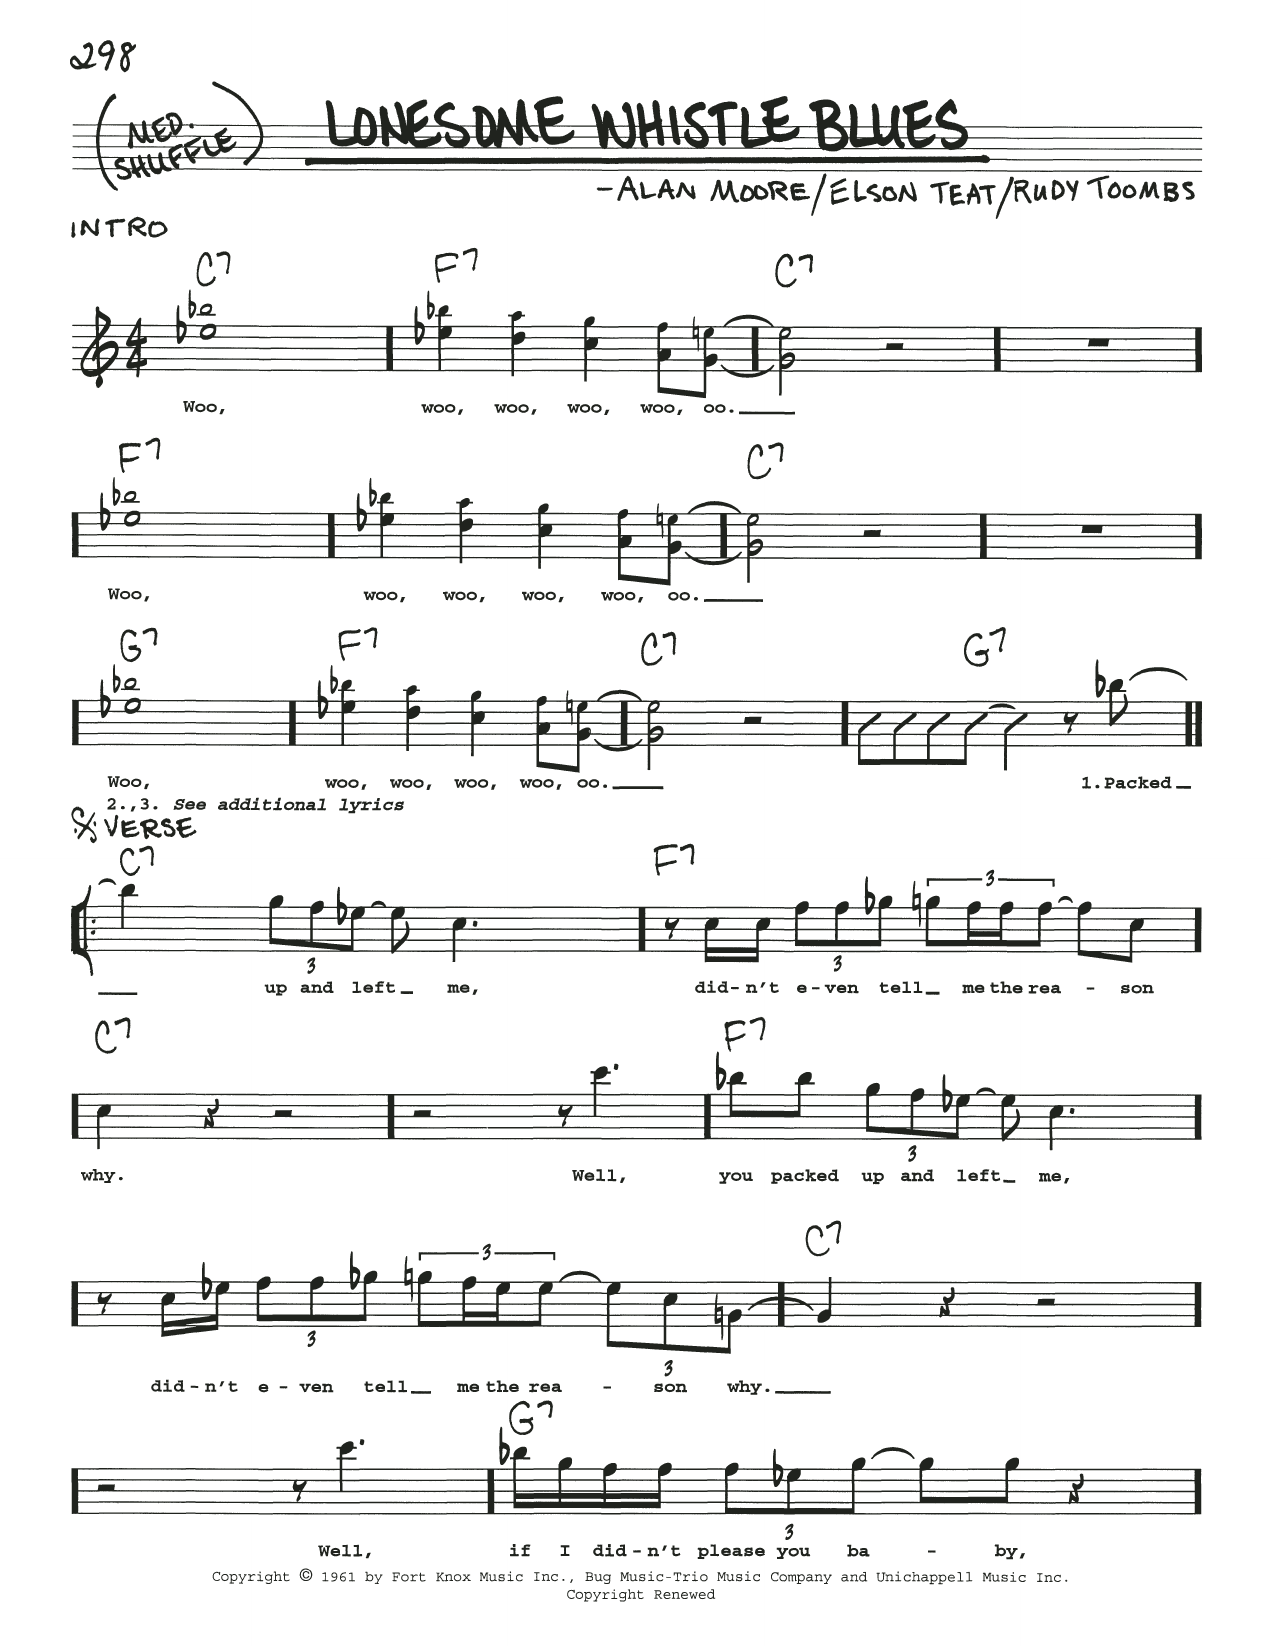 Download Rudy Toombs Lonesome Whistle Blues Sheet Music